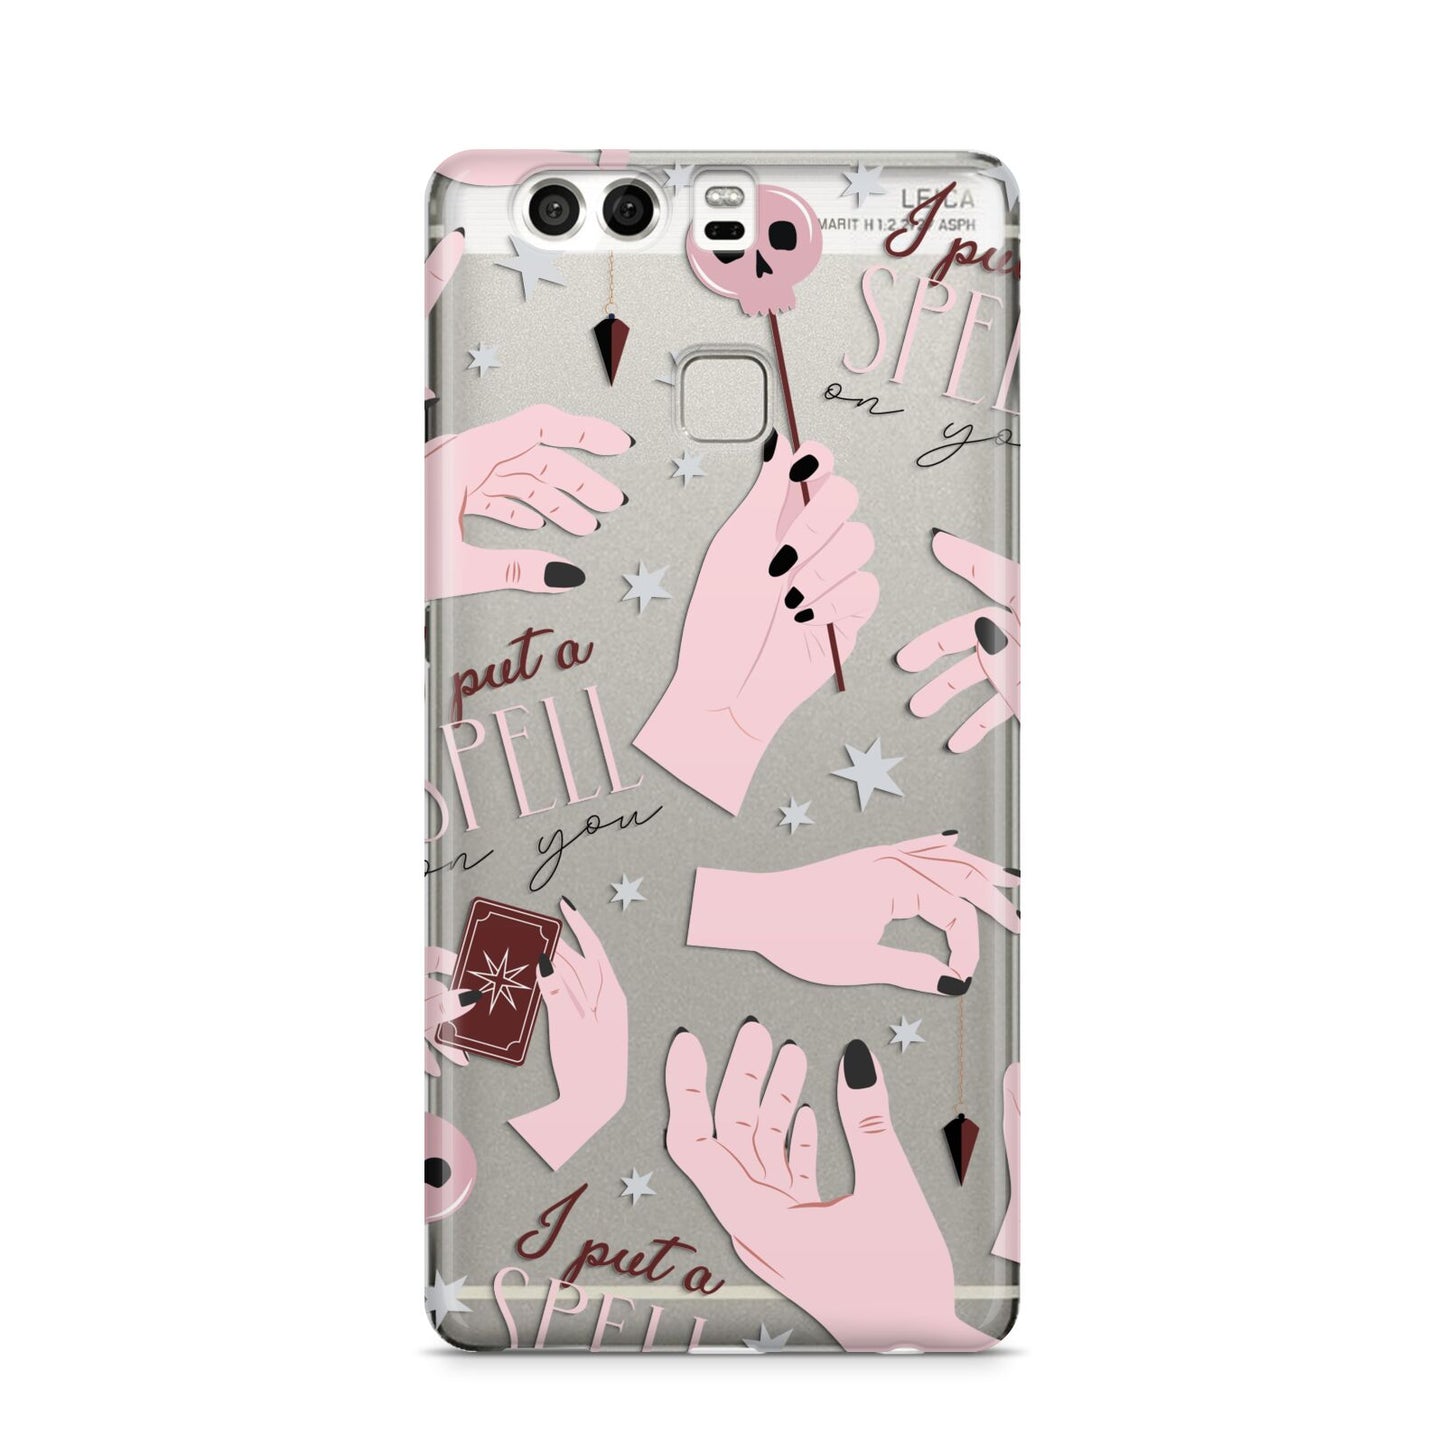 Witches Hands and Tarot Cards Huawei P9 Case